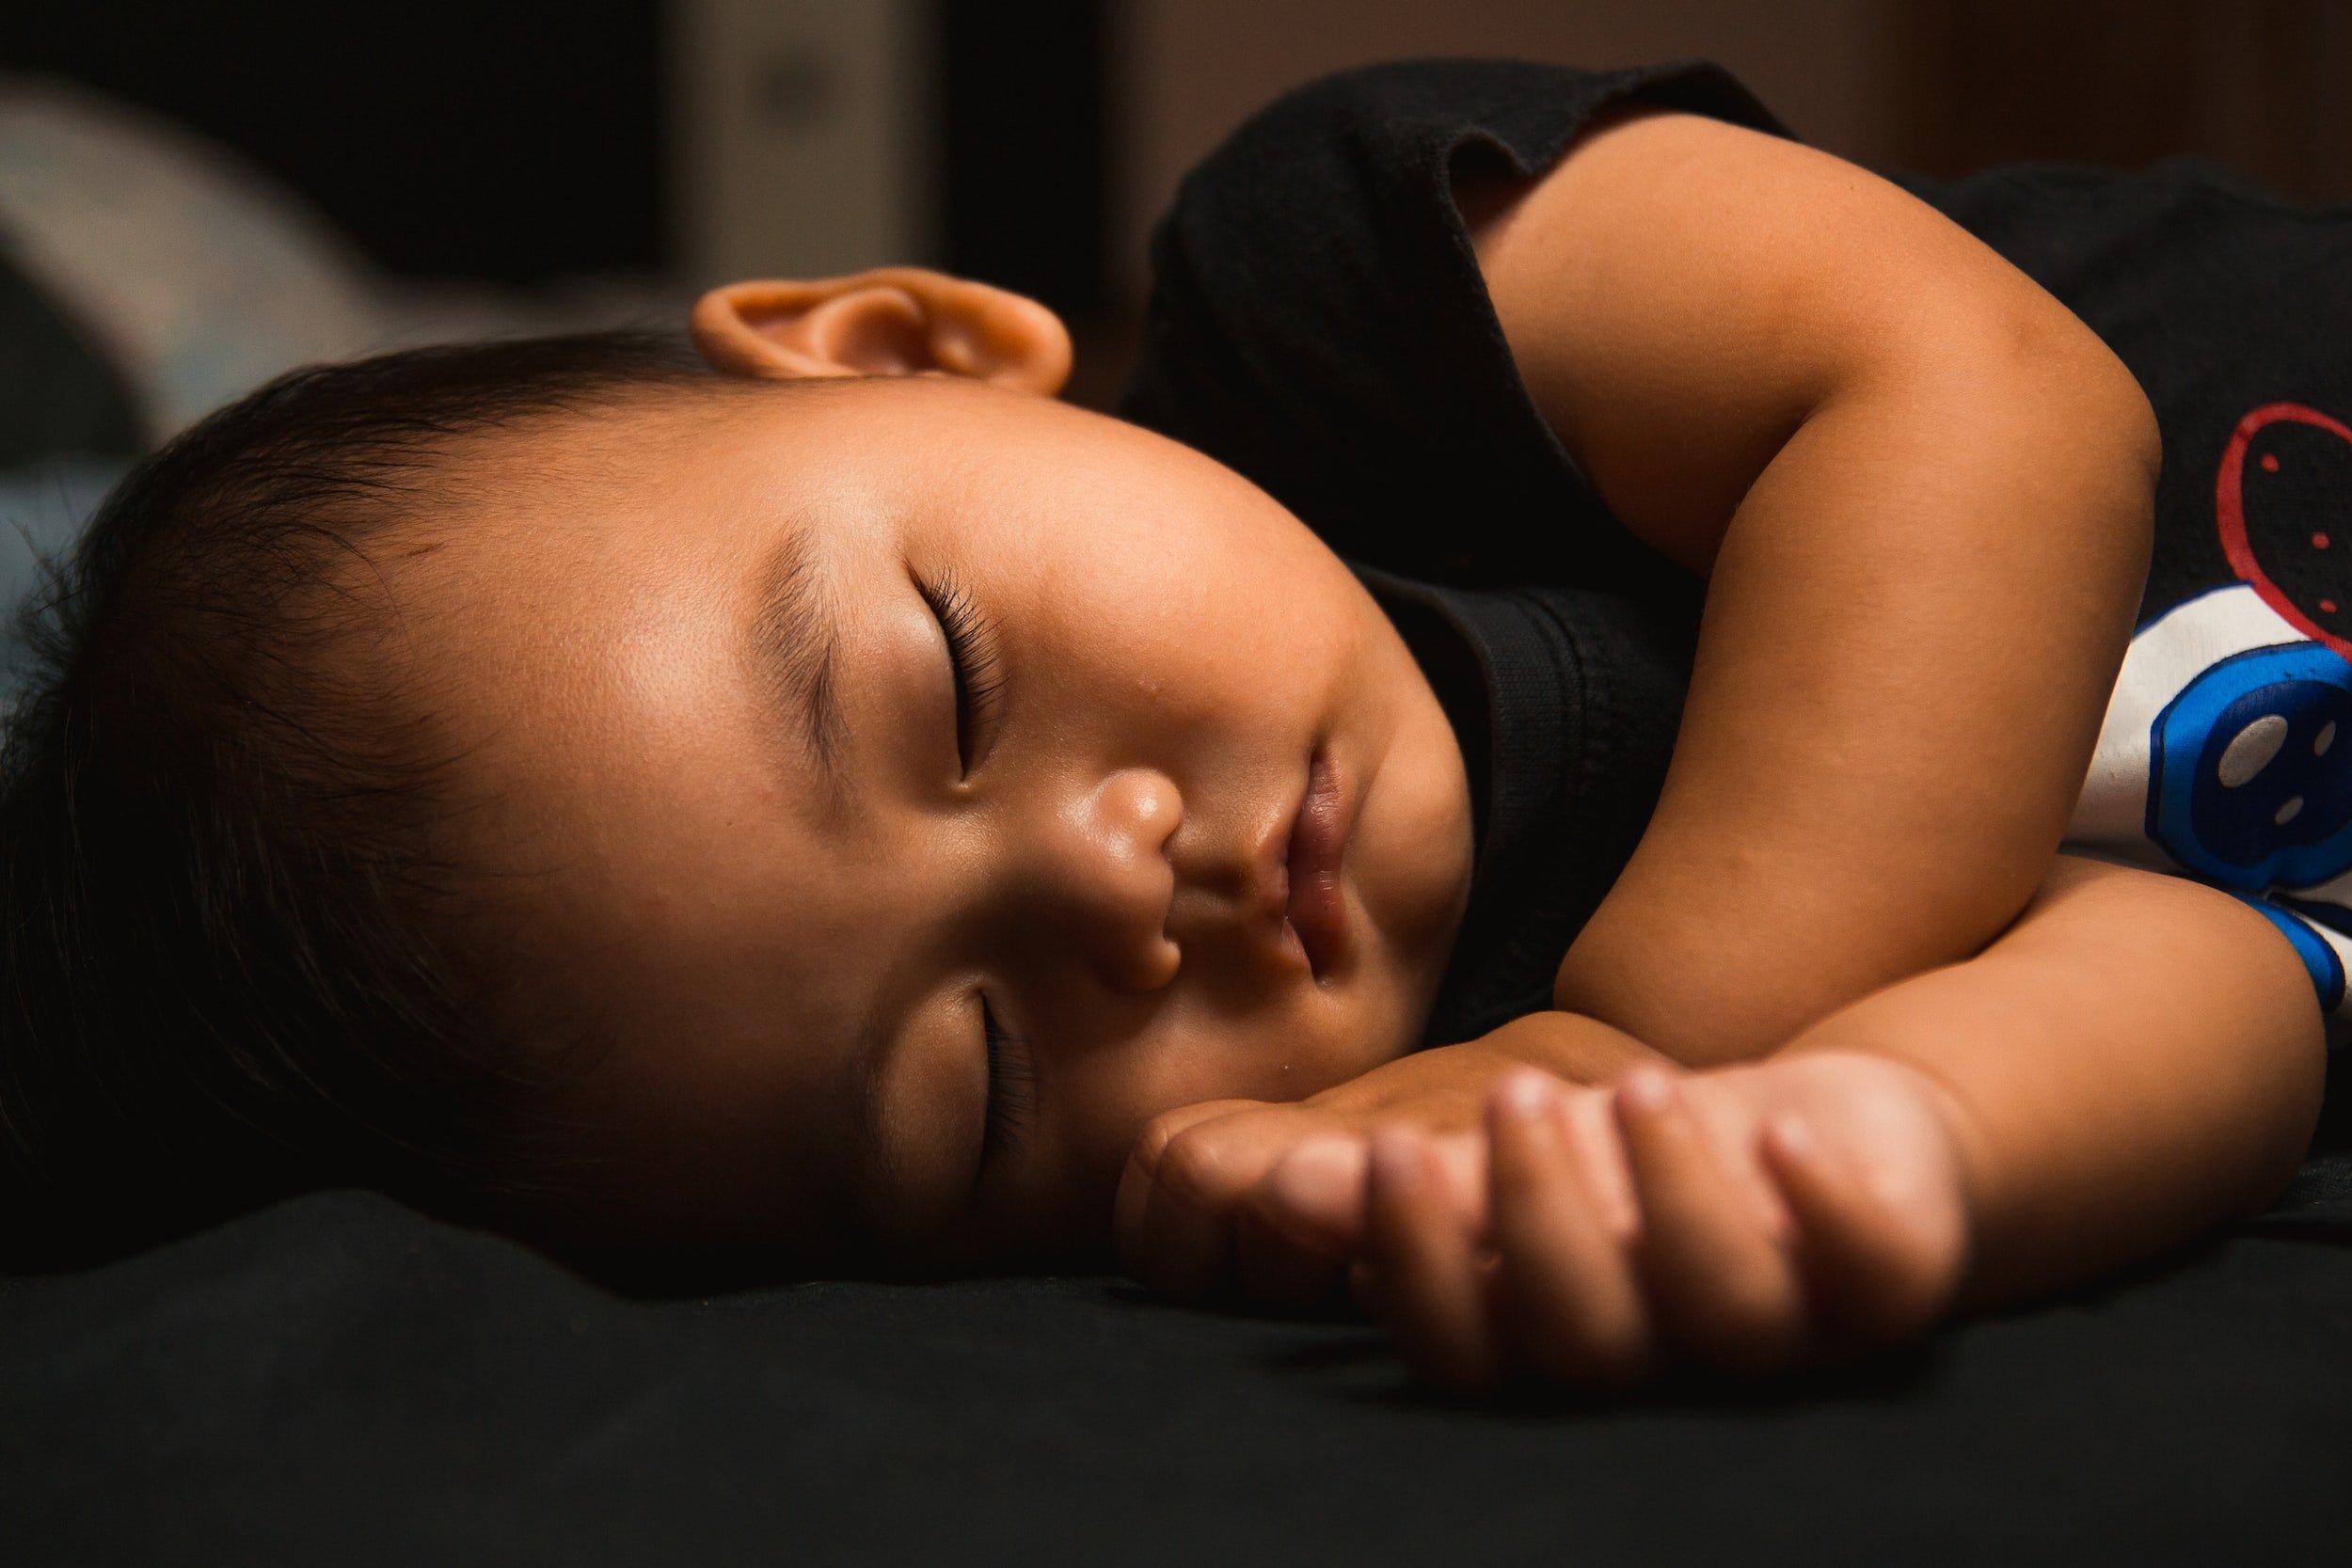 Should You Wake Your Baby or Child Up? Or Let Them Sleep?